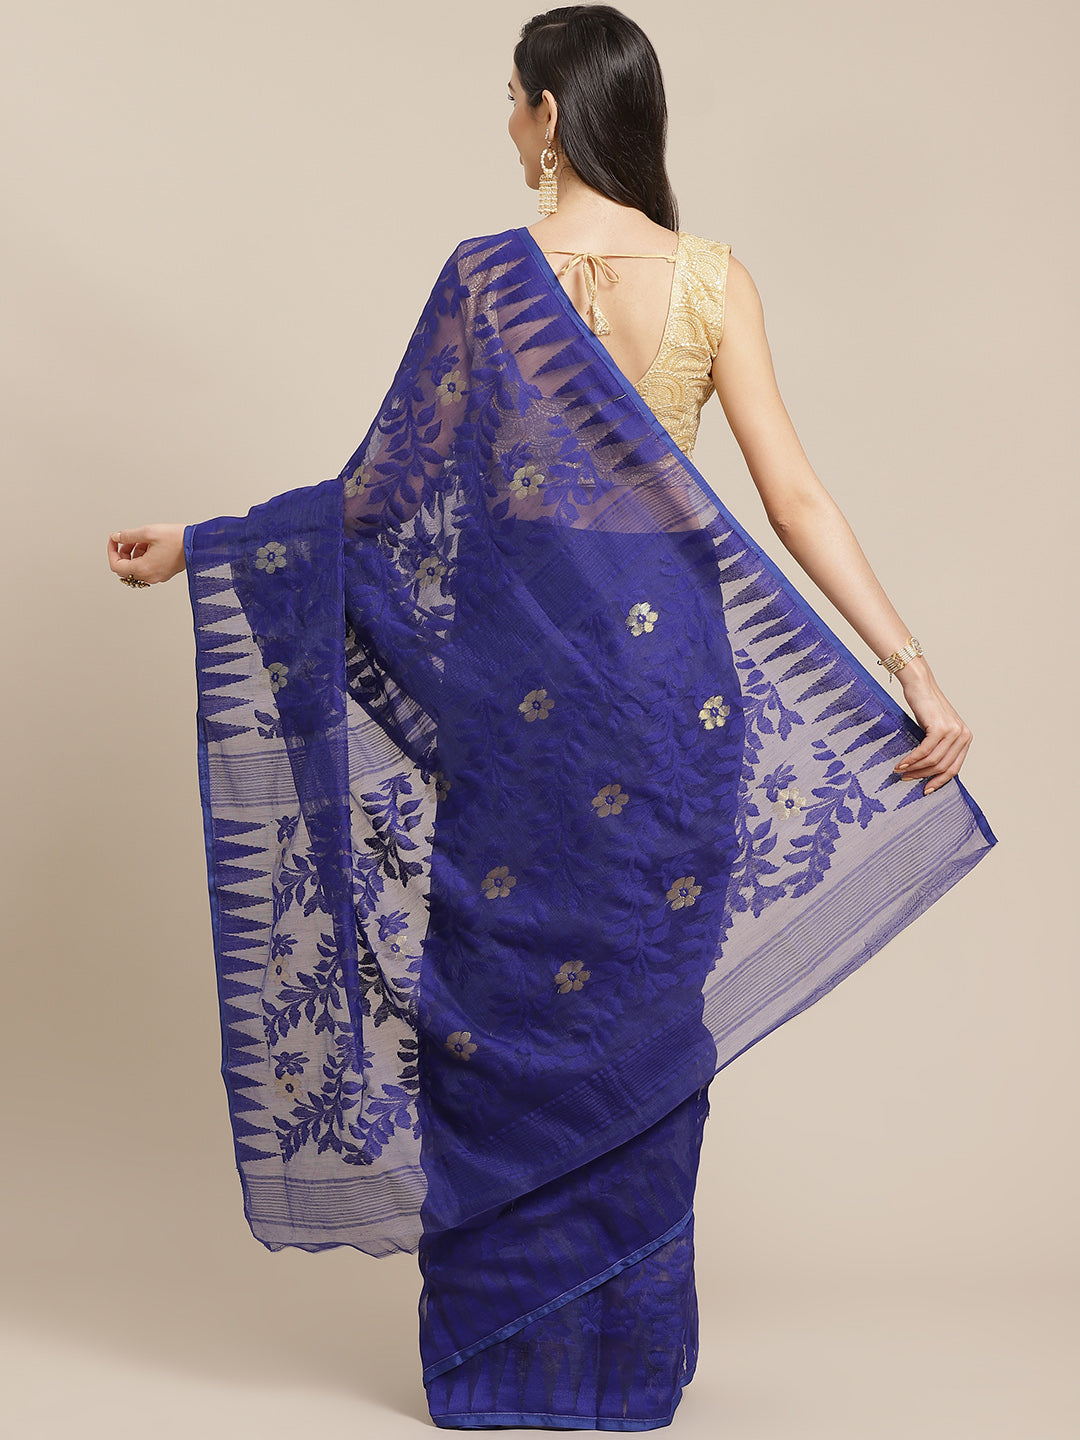 Blue and Tan, Kalakari India Jamdani Silk Cotton Woven Design Saree without blouse CHBHSA0018-Saree-Kalakari India-CHBHSA0018-Bengal, Geographical Indication, Hand Crafted, Hand Painted, Heritage Prints, Jamdani, Natural Dyes, Red, Sarees, Silk Blended, Sustainable Fabrics, Woven, Yellow-[Linen,Ethnic,wear,Fashionista,Handloom,Handicraft,Indigo,blockprint,block,print,Cotton,Chanderi,Blue, latest,classy,party,bollywood,trendy,summer,style,traditional,formal,elegant,unique,style,hand,block,print, 